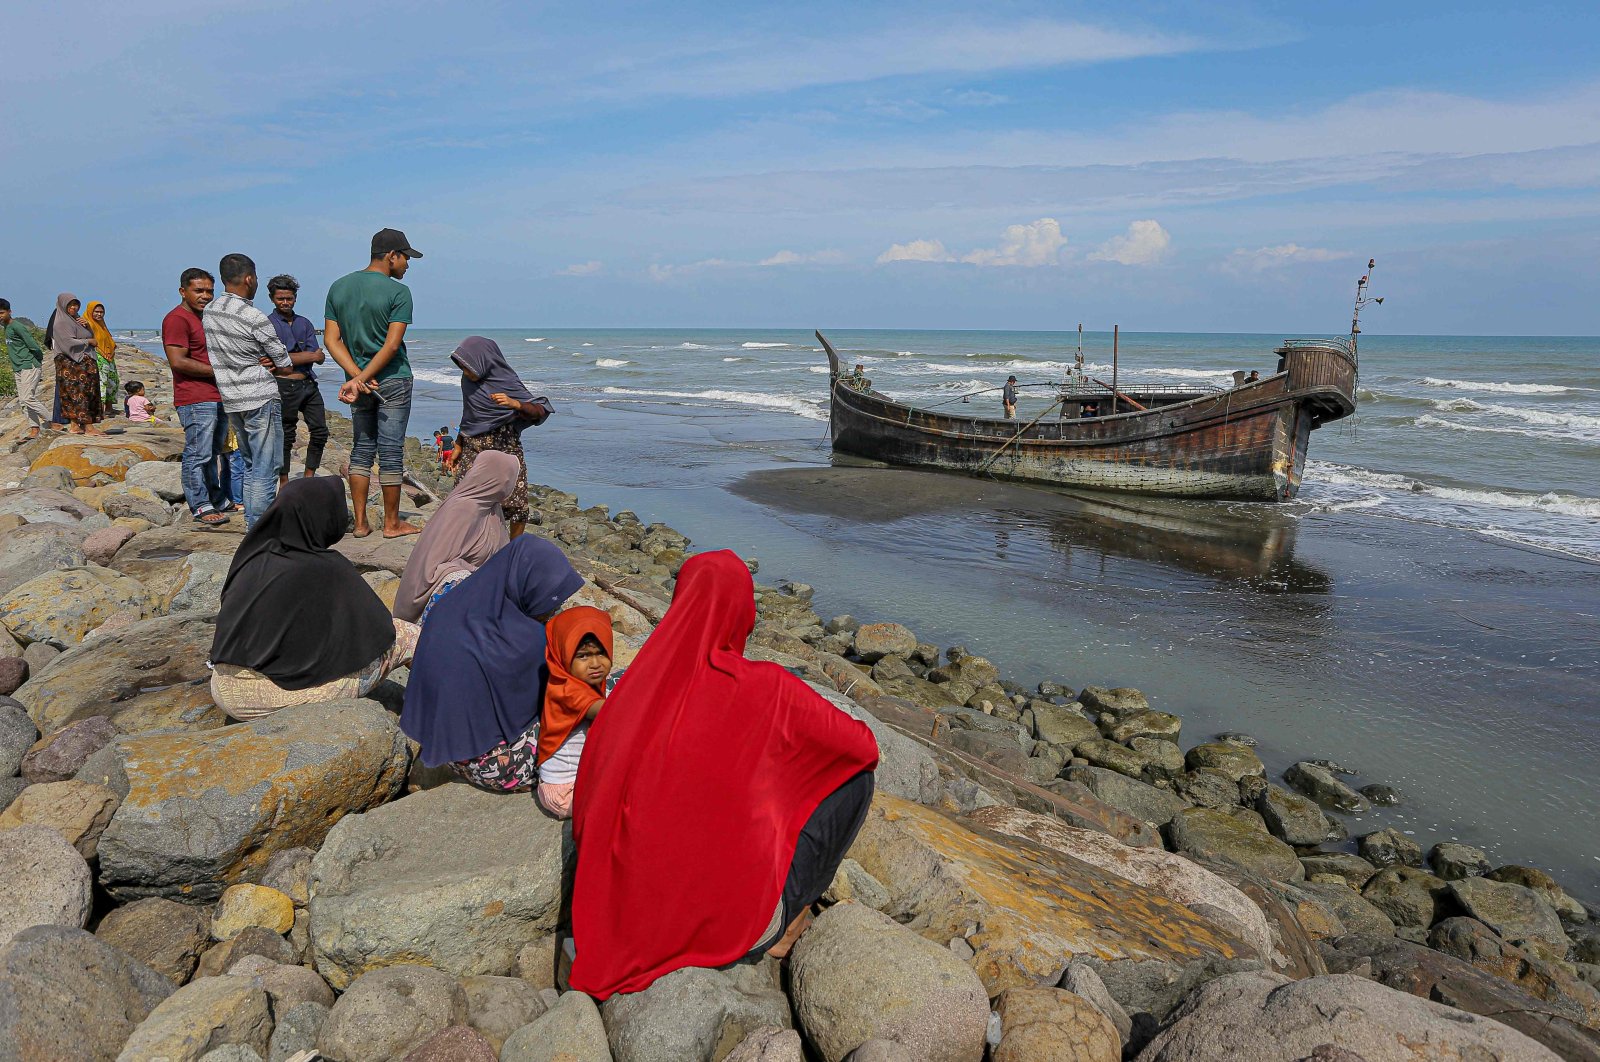 Villagers look at a wooden boat used by Rohingya people in Pidie, Aceh province, Indonesia, Dec. 27, 2022. (AFP Photo)